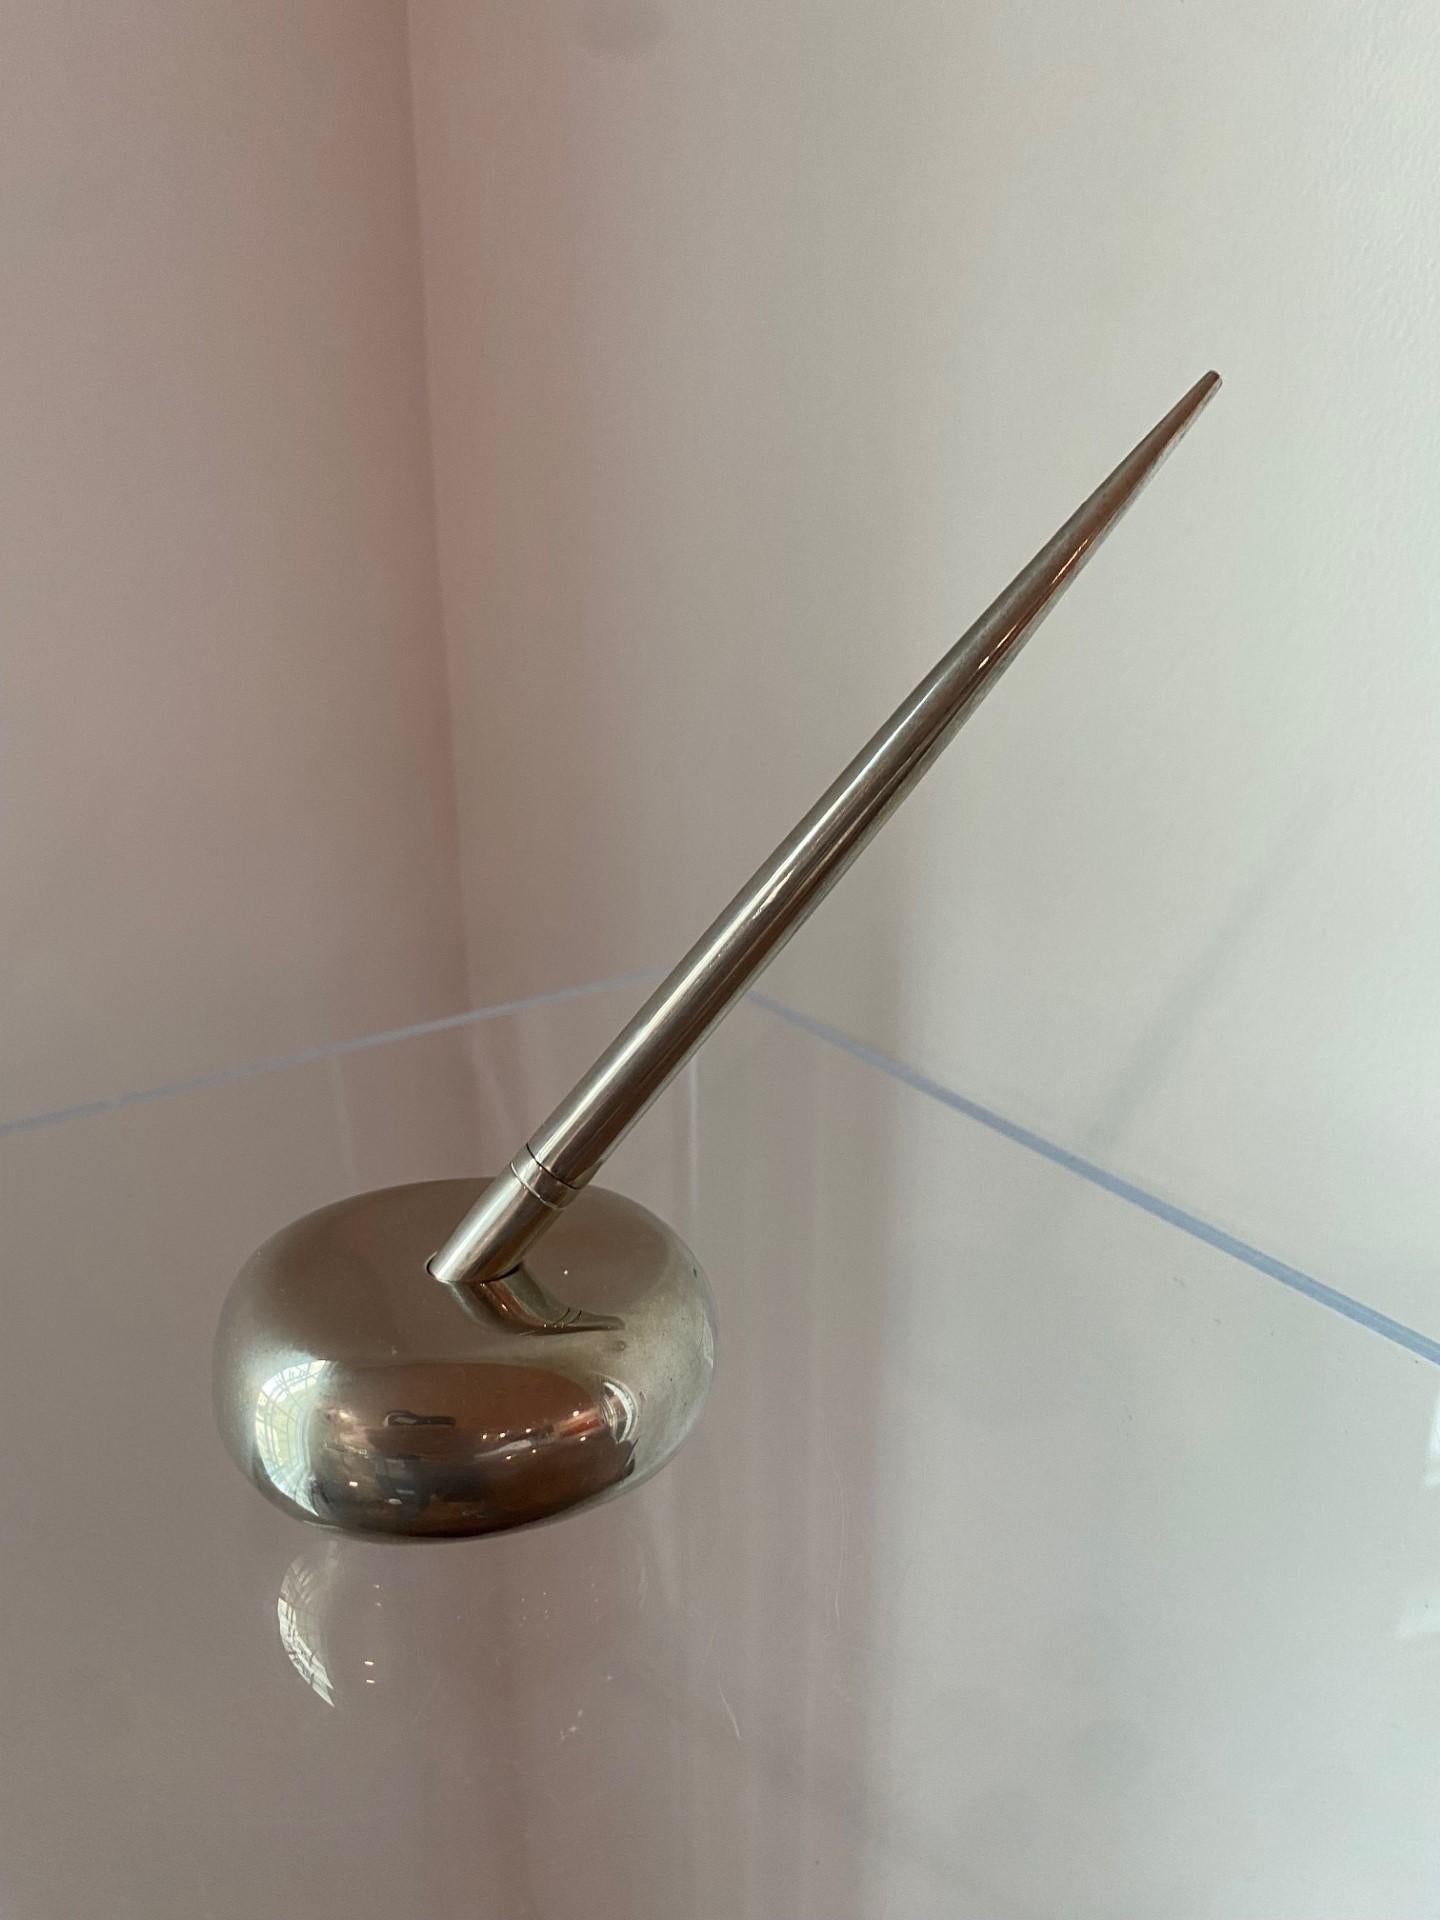 American Mid-Century Modernist Sculptural Pen with Pen Holder 1960s For Sale